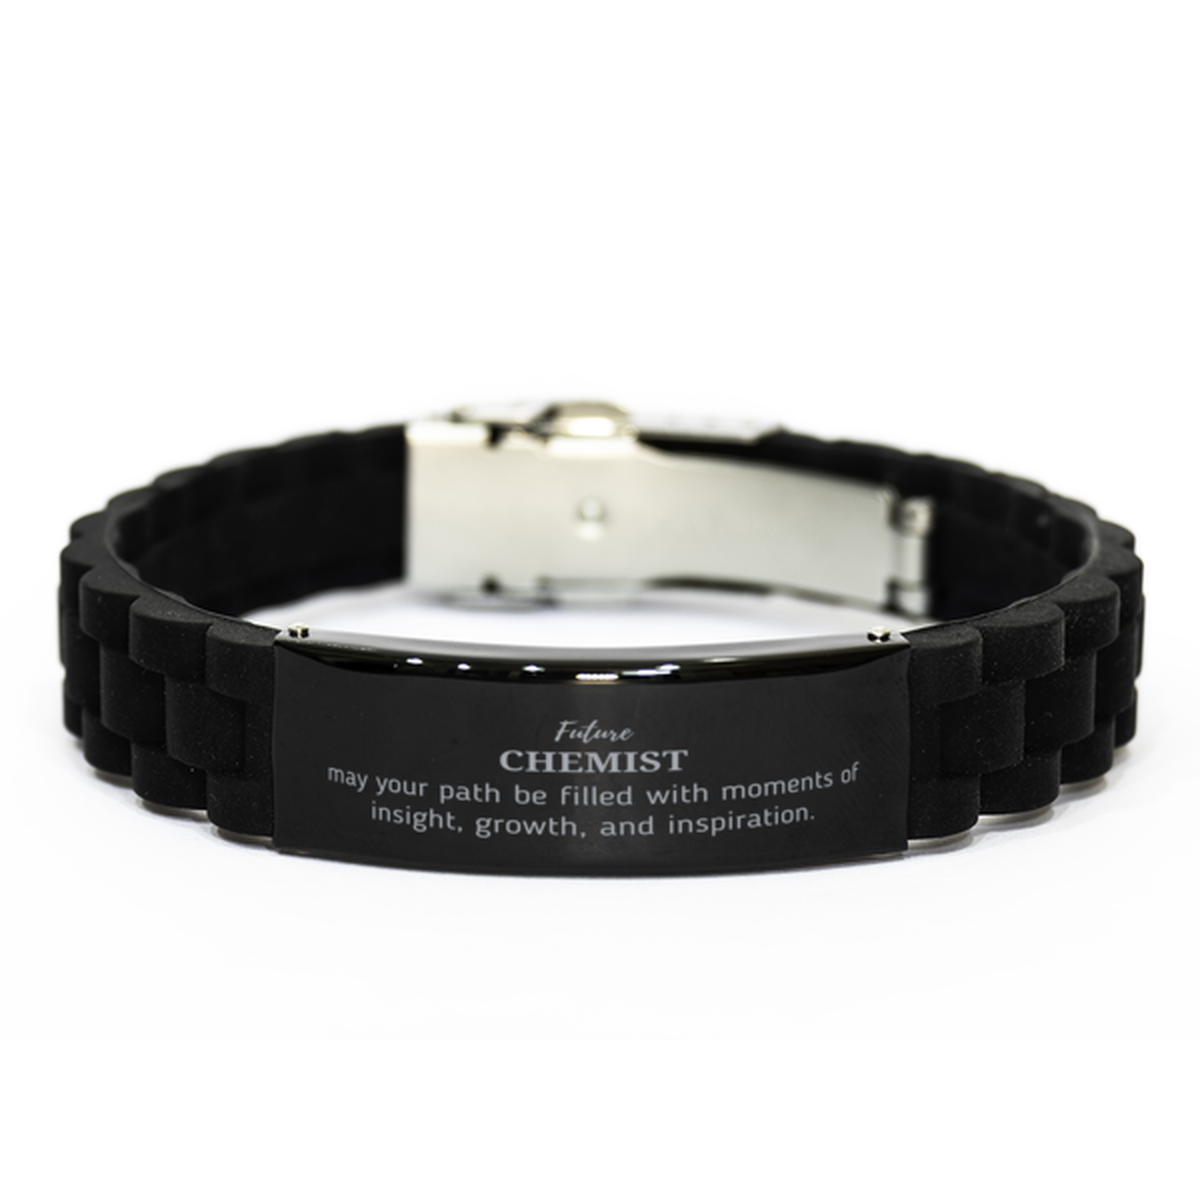 Future Chemist Gifts, May your path be filled with moments of insight, Graduation Gifts for New Chemist, Christmas Unique Black Glidelock Clasp Bracelet For Men, Women, Friends